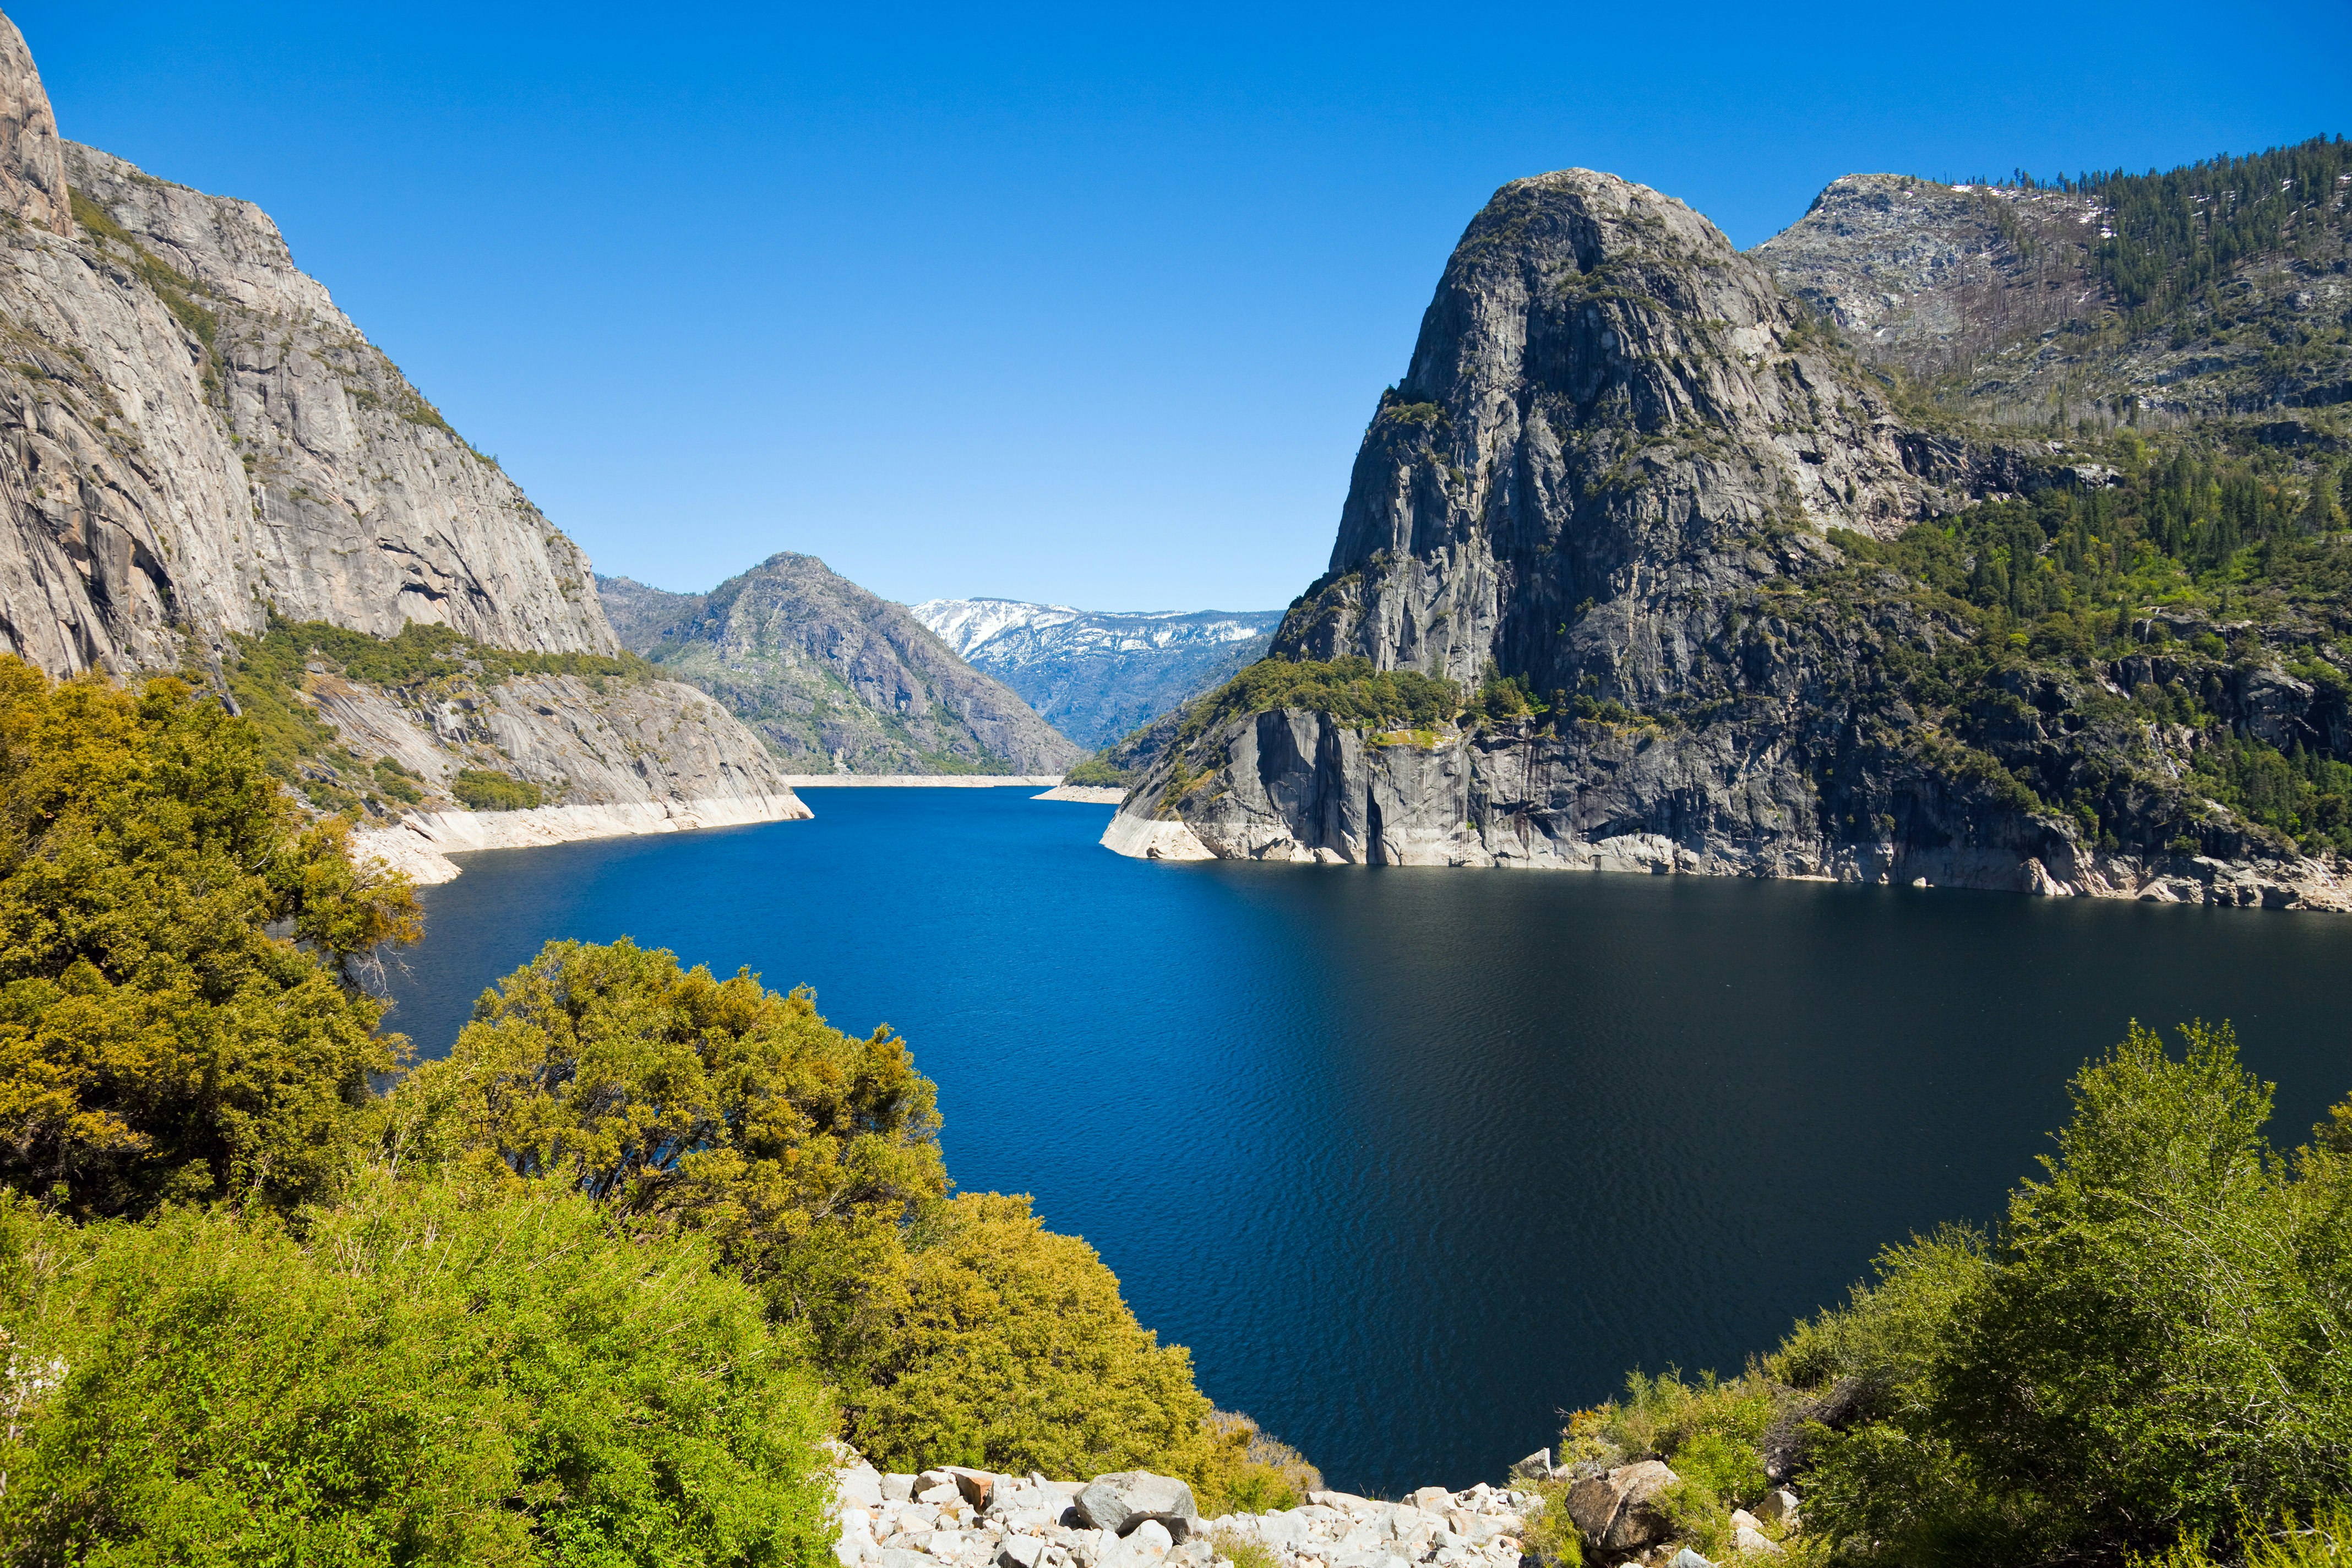 Hetch Hetchy Reservoir with blue sky above in Yosemite National Park.